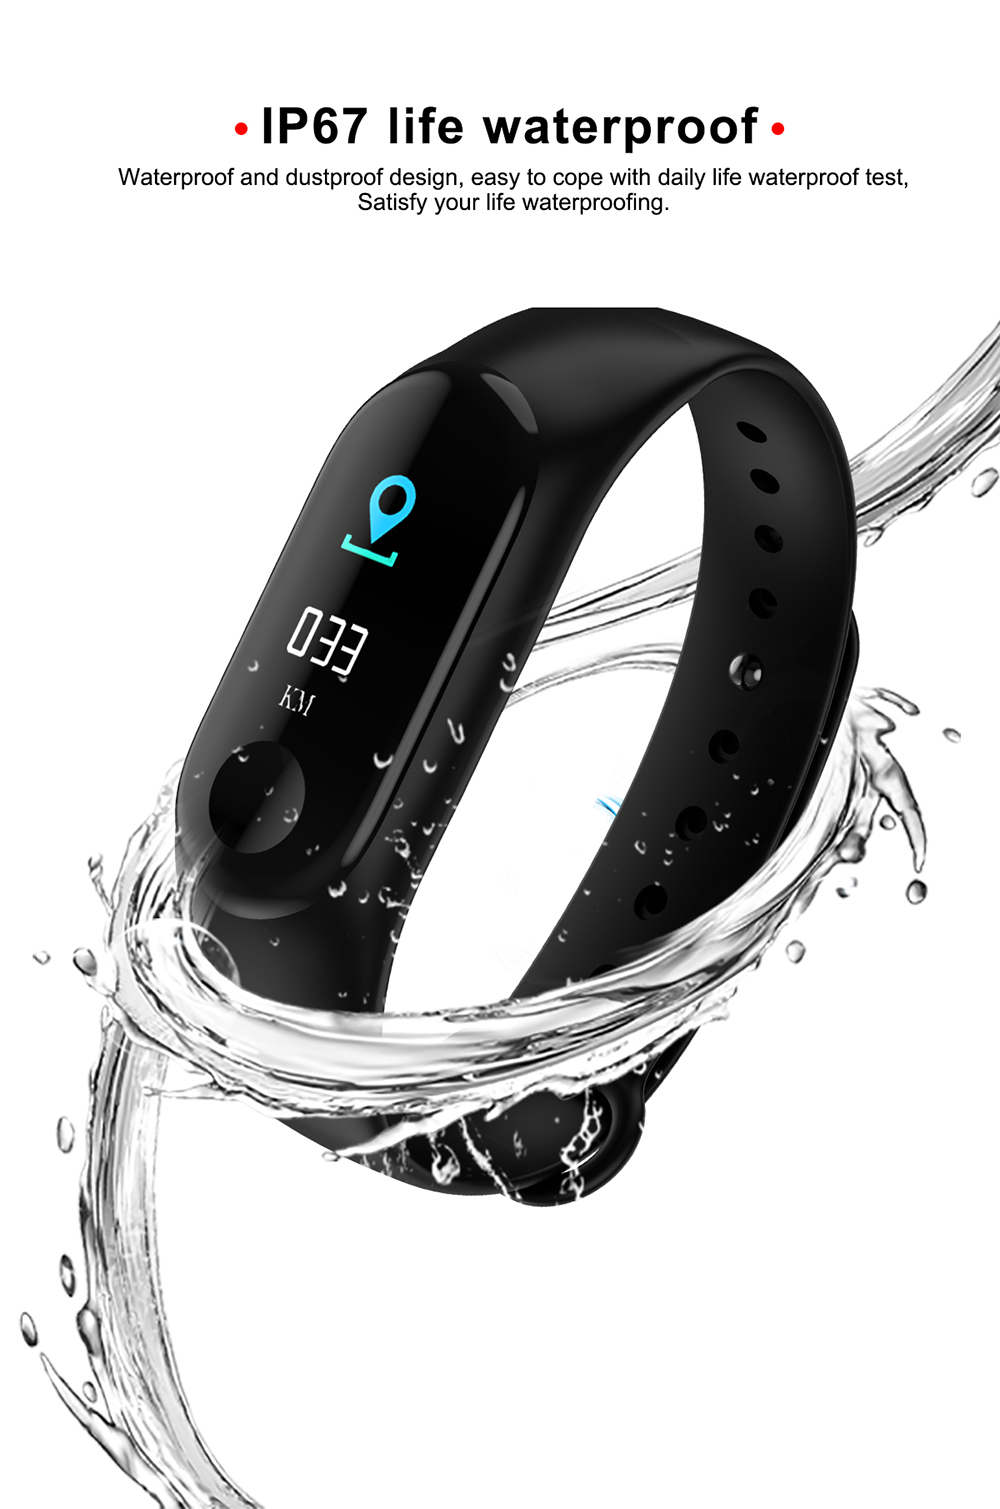 M3 Plus Smart Bracelet 0.96 inch Screen Bluetooth 4.0 Call / Message Reminder Heart Rate Monitor Functions